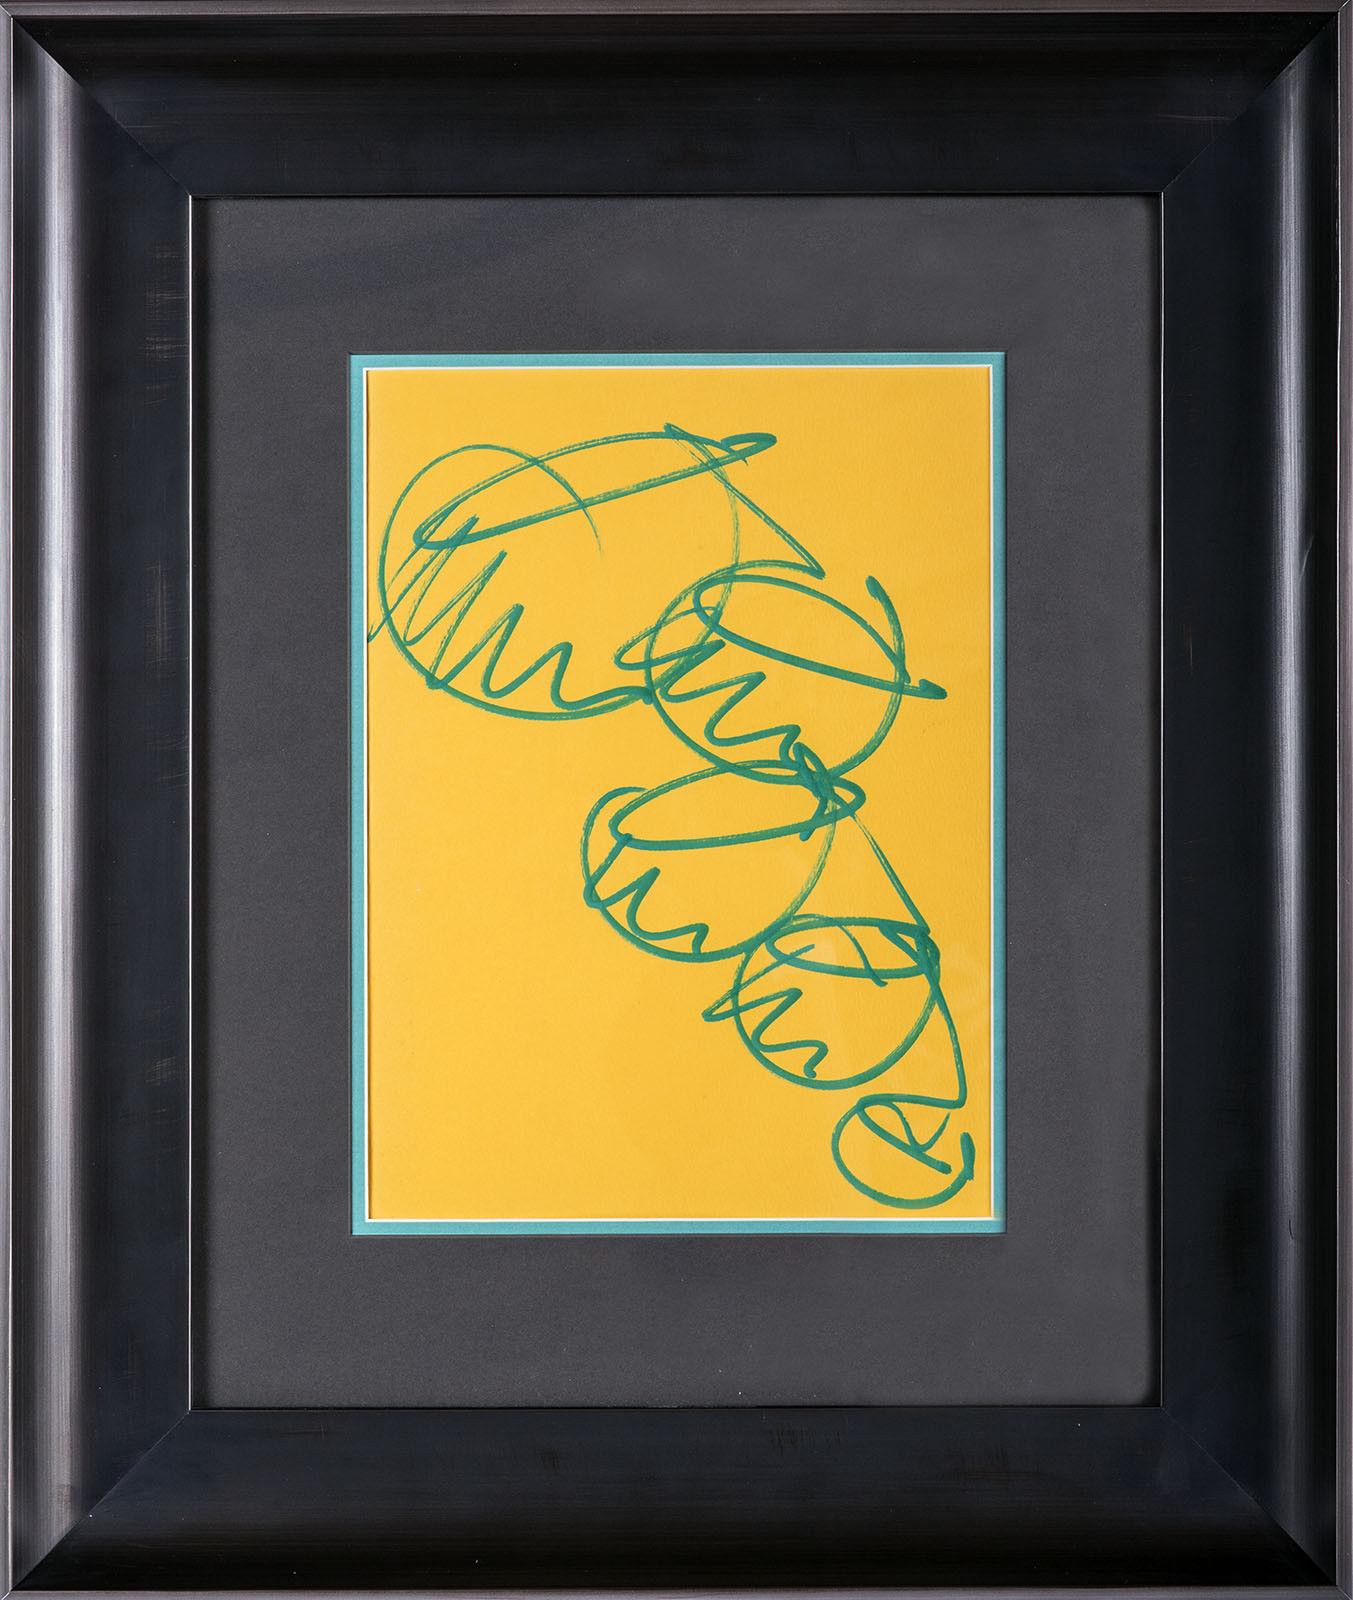 Artist: Dale Chihuly
Title:  Las Tres Hermanas Ikebanas
Medium: Mixed Media Sugar Lift Aquatint with Handwork and Charring
Size:  14 1/8" x33 1/4"
Year: 2008
Edition: 61/125
Condition: Signed and dated by Chihuly.  Unopened and remains in mint